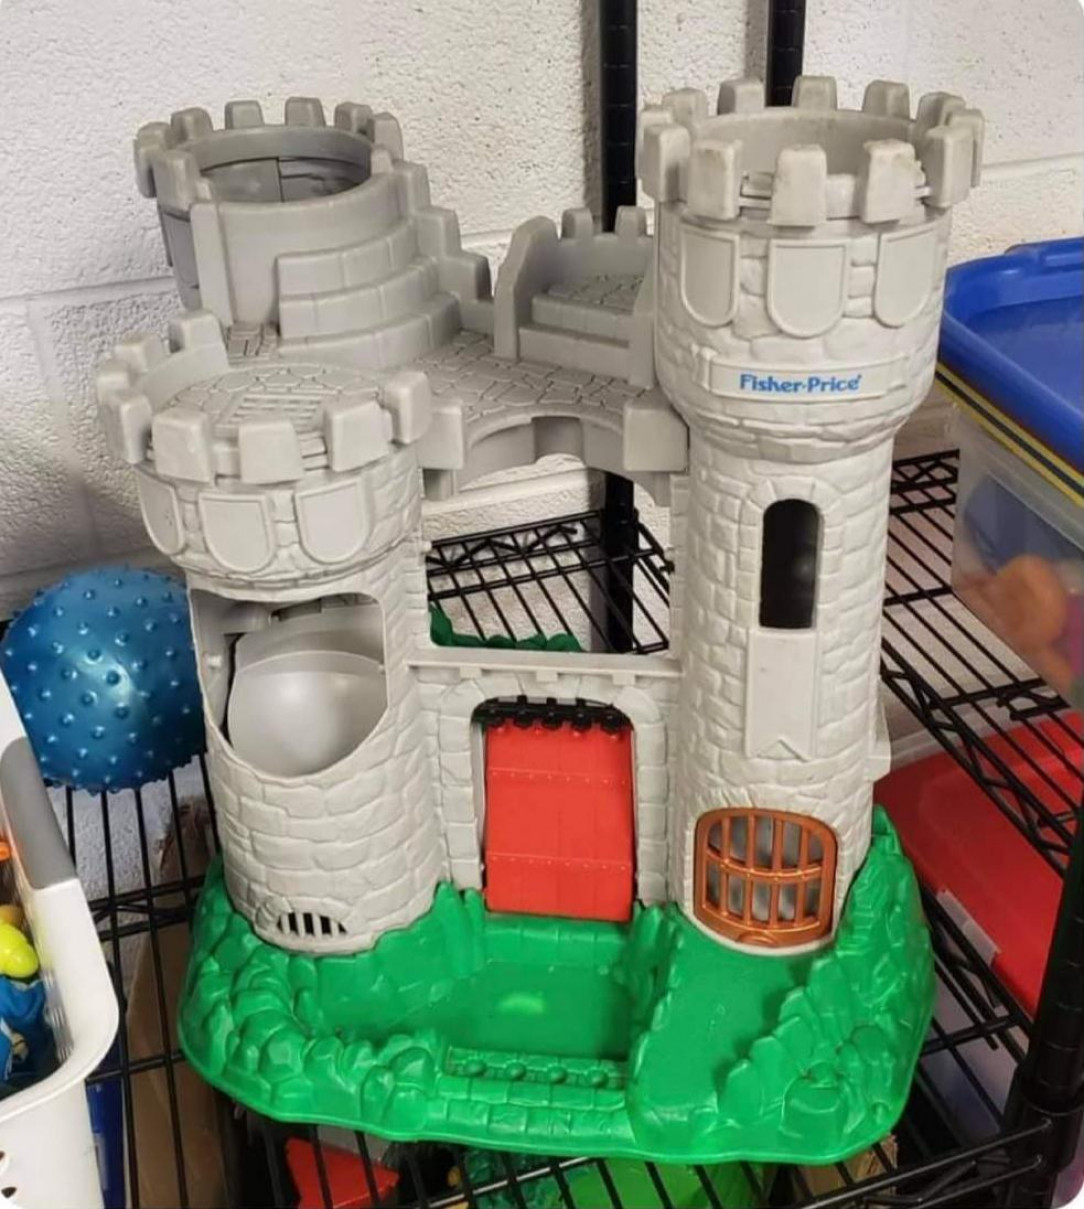 The infamous Fisher price toy castle